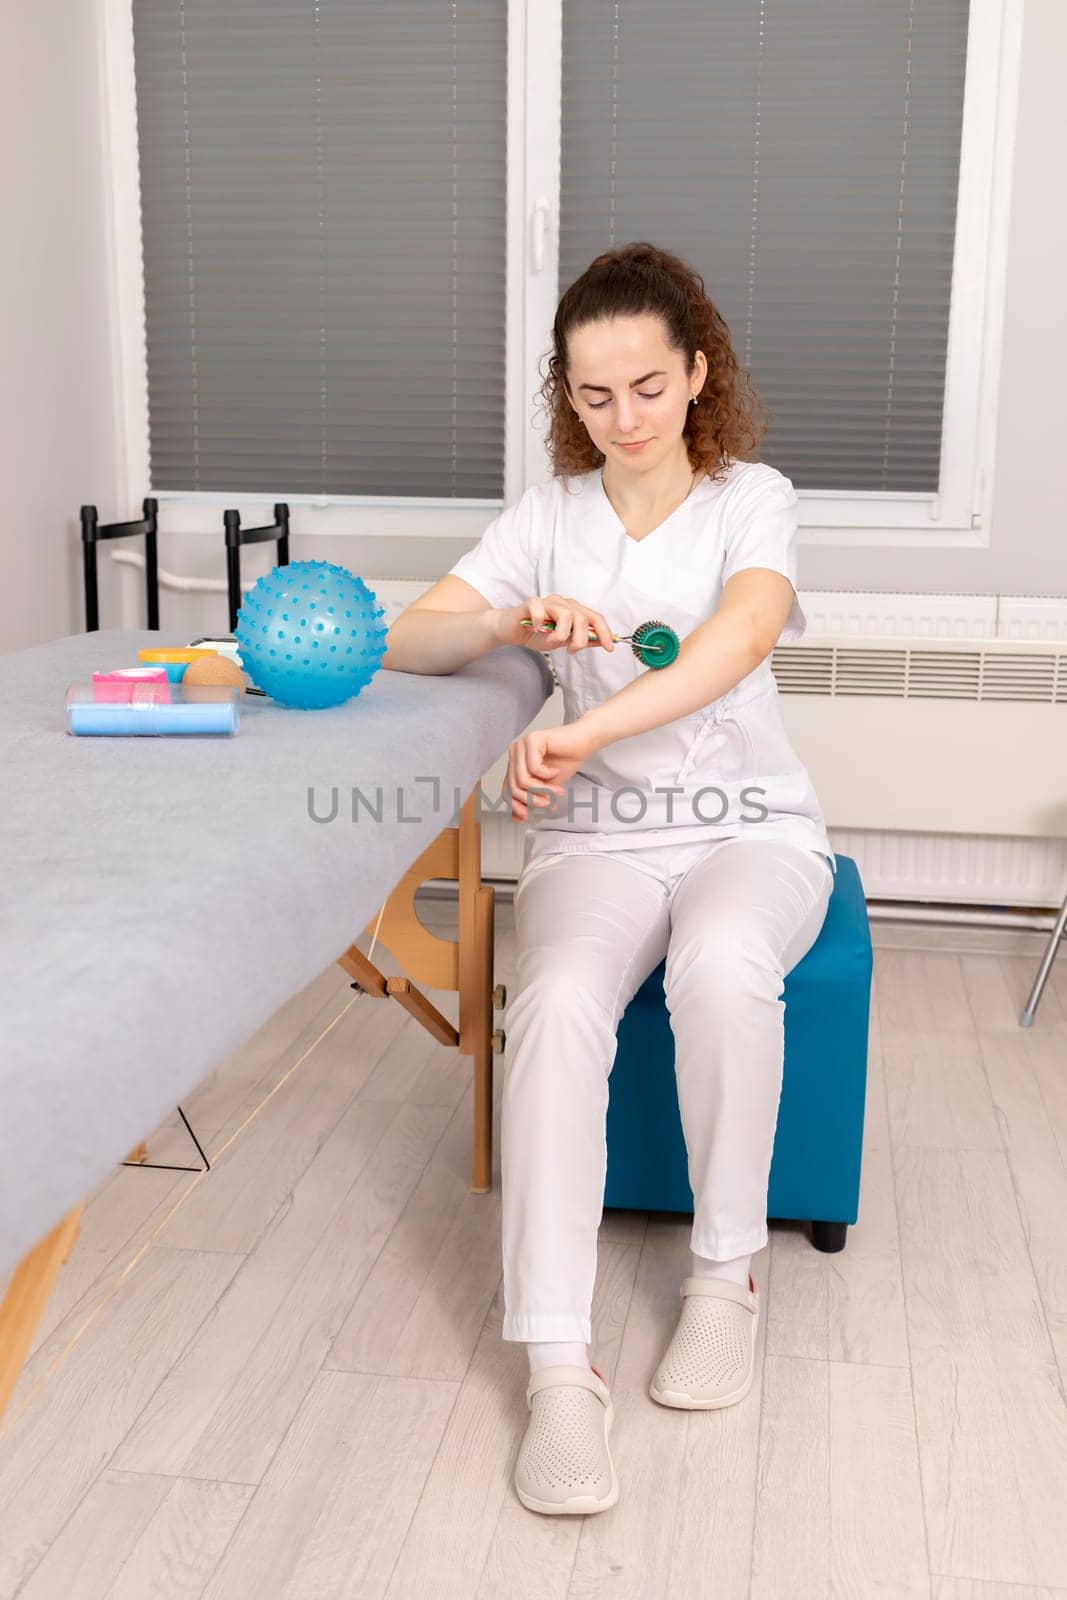 Rehabilitation Specialist, Physical Therapist With Rehab Tools, Foam Roller,Massage Ball With Pimples, Mesoroller With Titanium Needles, Kinesiology Tape On Couch in Therapeutic Room. Vertical plane